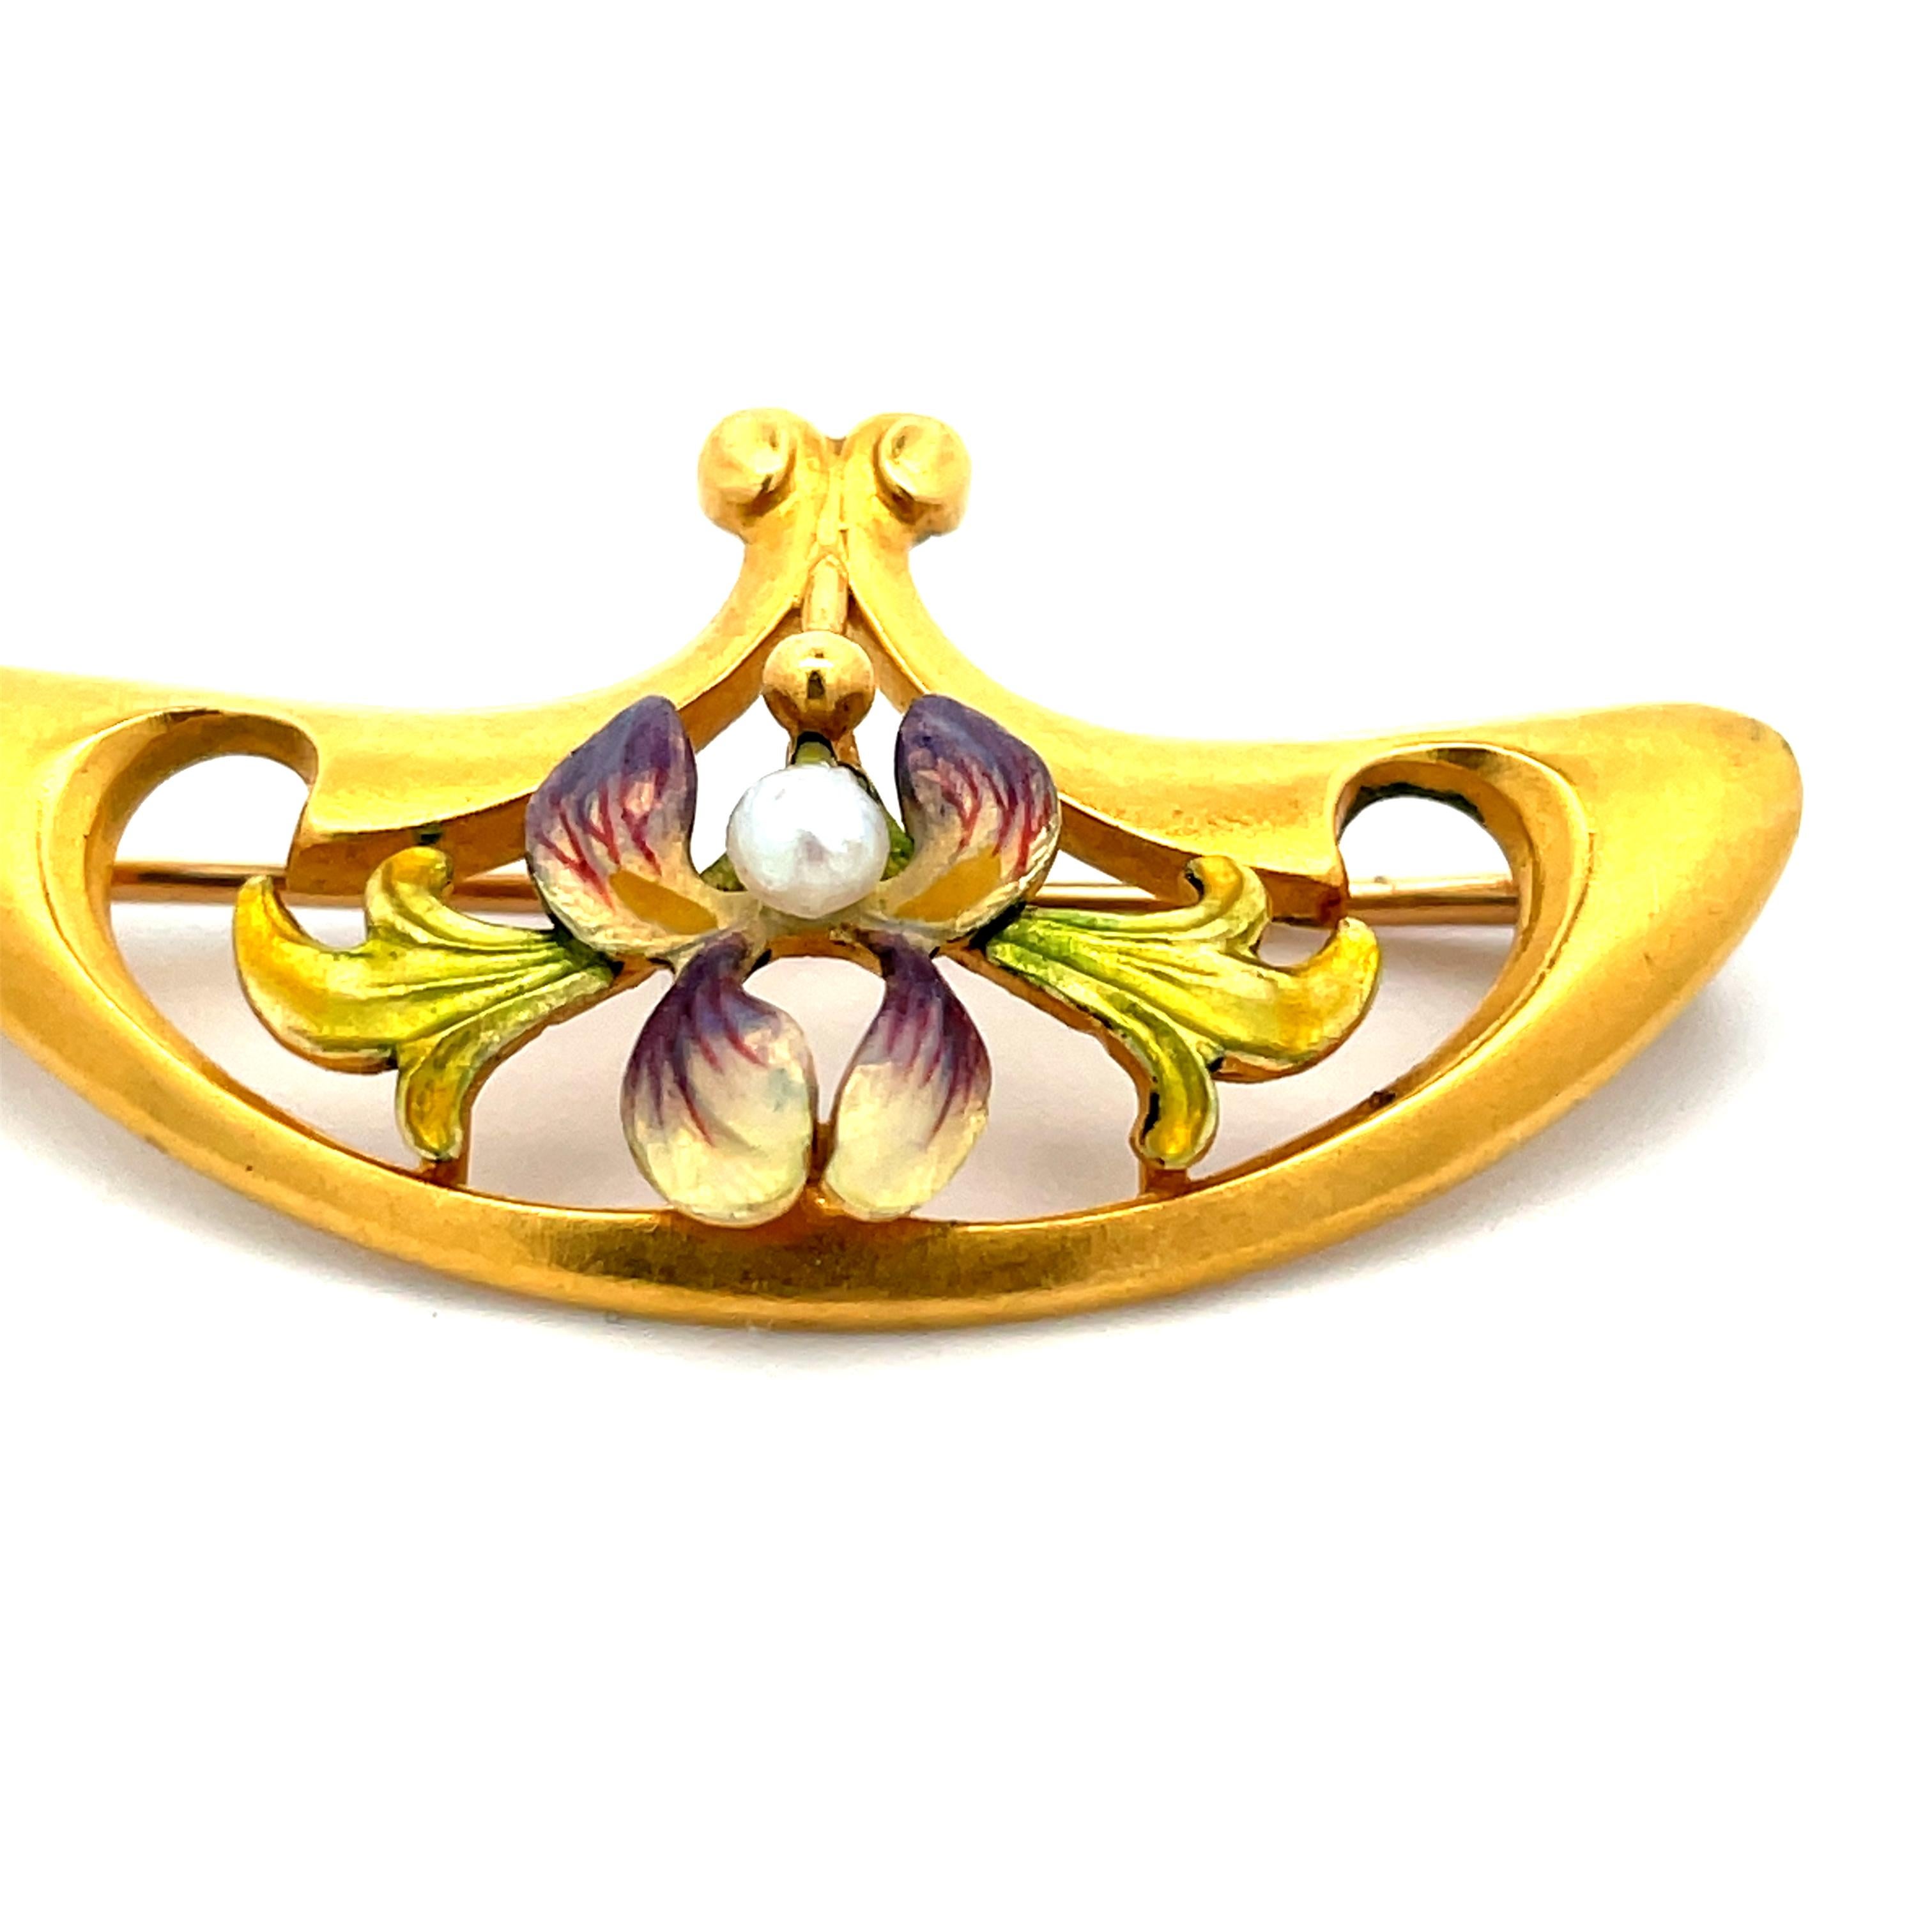 1890 Art Nouveau 14K Yellow Gold Krementz Iris with Pearl Broach  In Excellent Condition For Sale In Lexington, KY